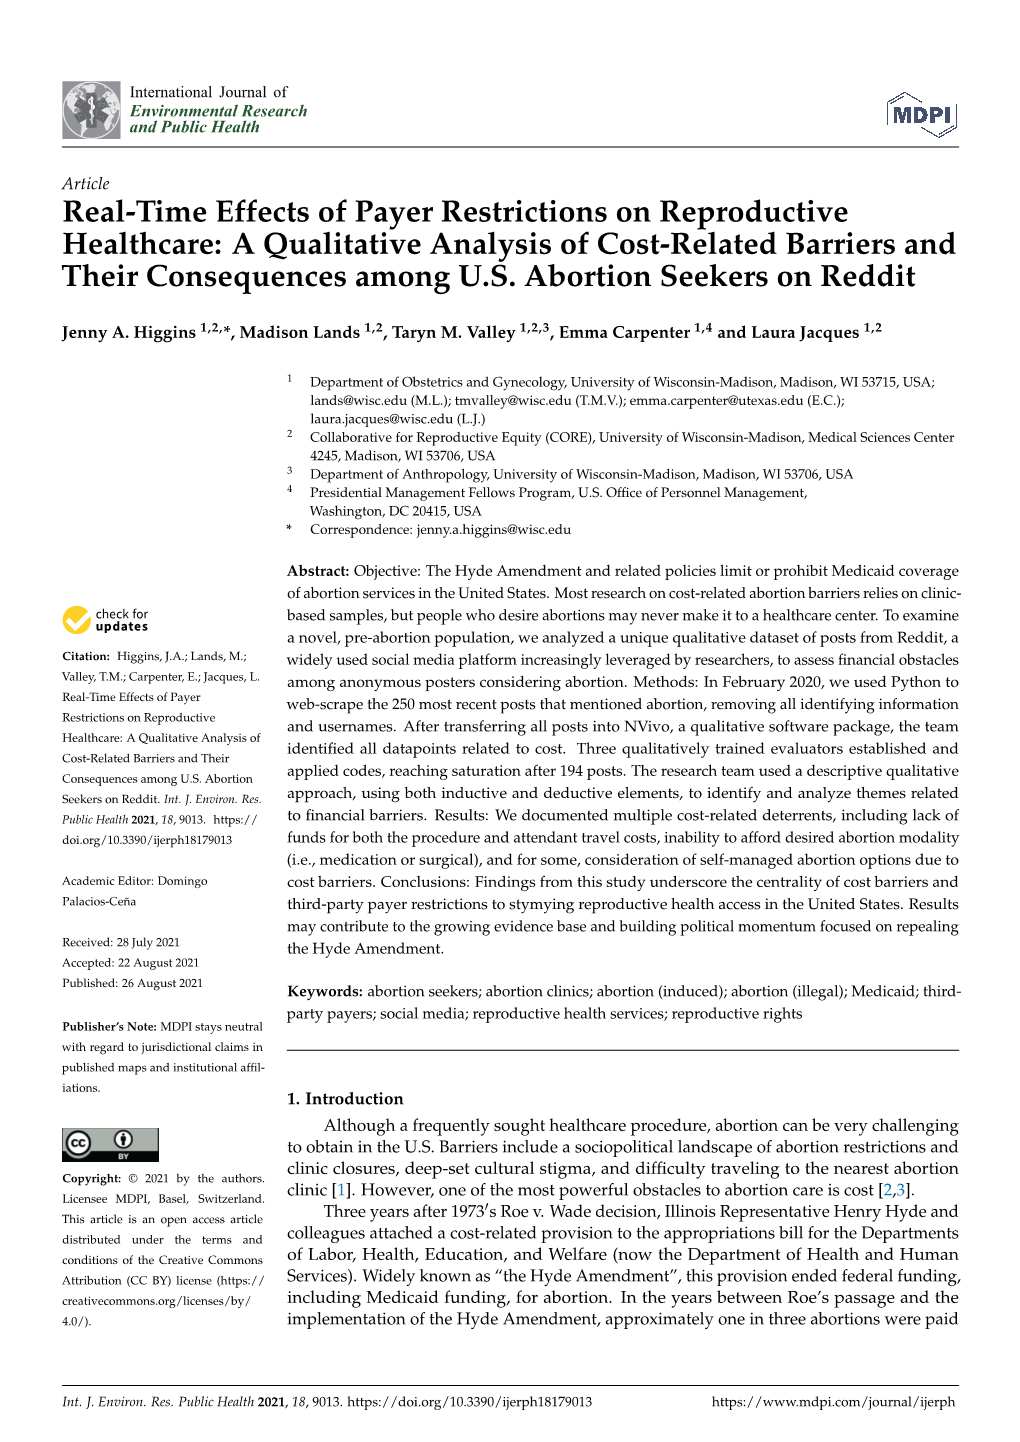 A Qualitative Analysis of Cost-Related Barriers and Their Consequences Among U.S